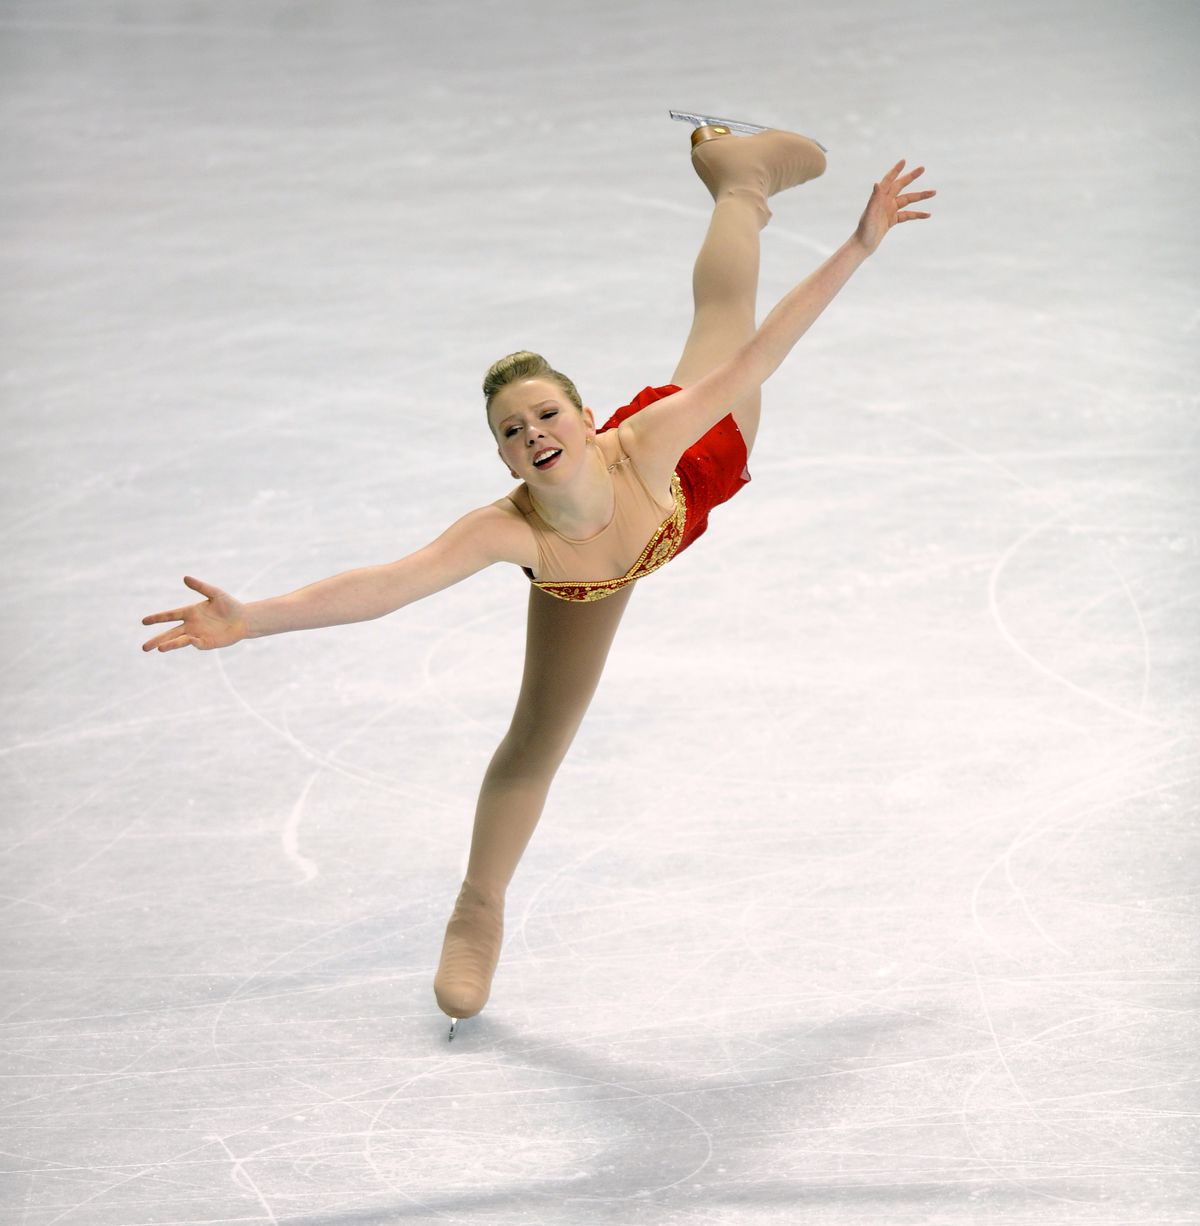 Rachael Flatt performs her first-place championship ladies free skate program at the U.S. Figure Skating Championships in the Spokane Arena on Saturday, Jan. 23, 2010. (Colin Mulvany / The Spokesman-Review)